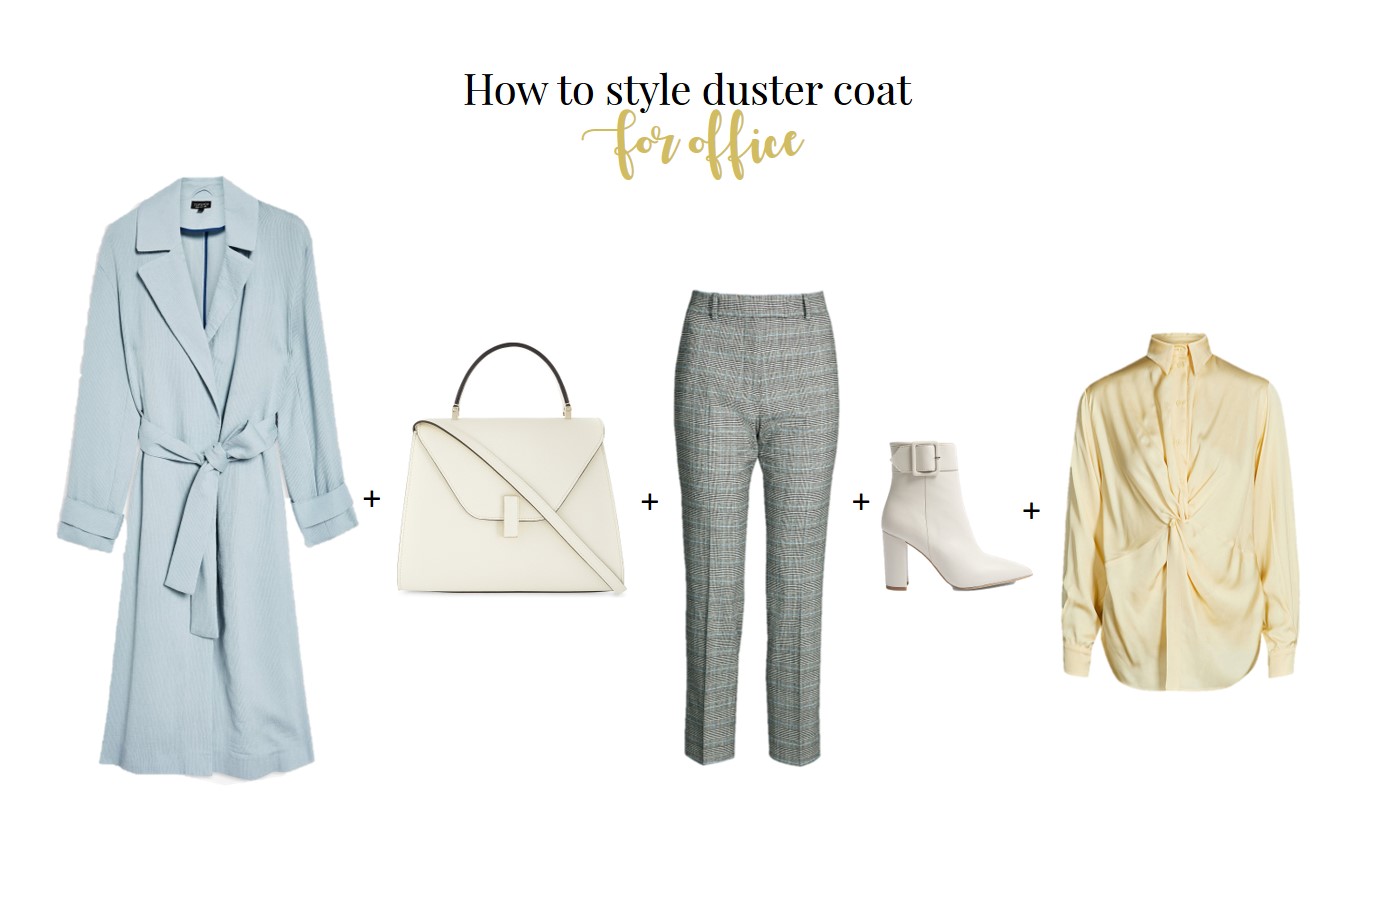 How to wear duster coat for work outfit inspiration for work 